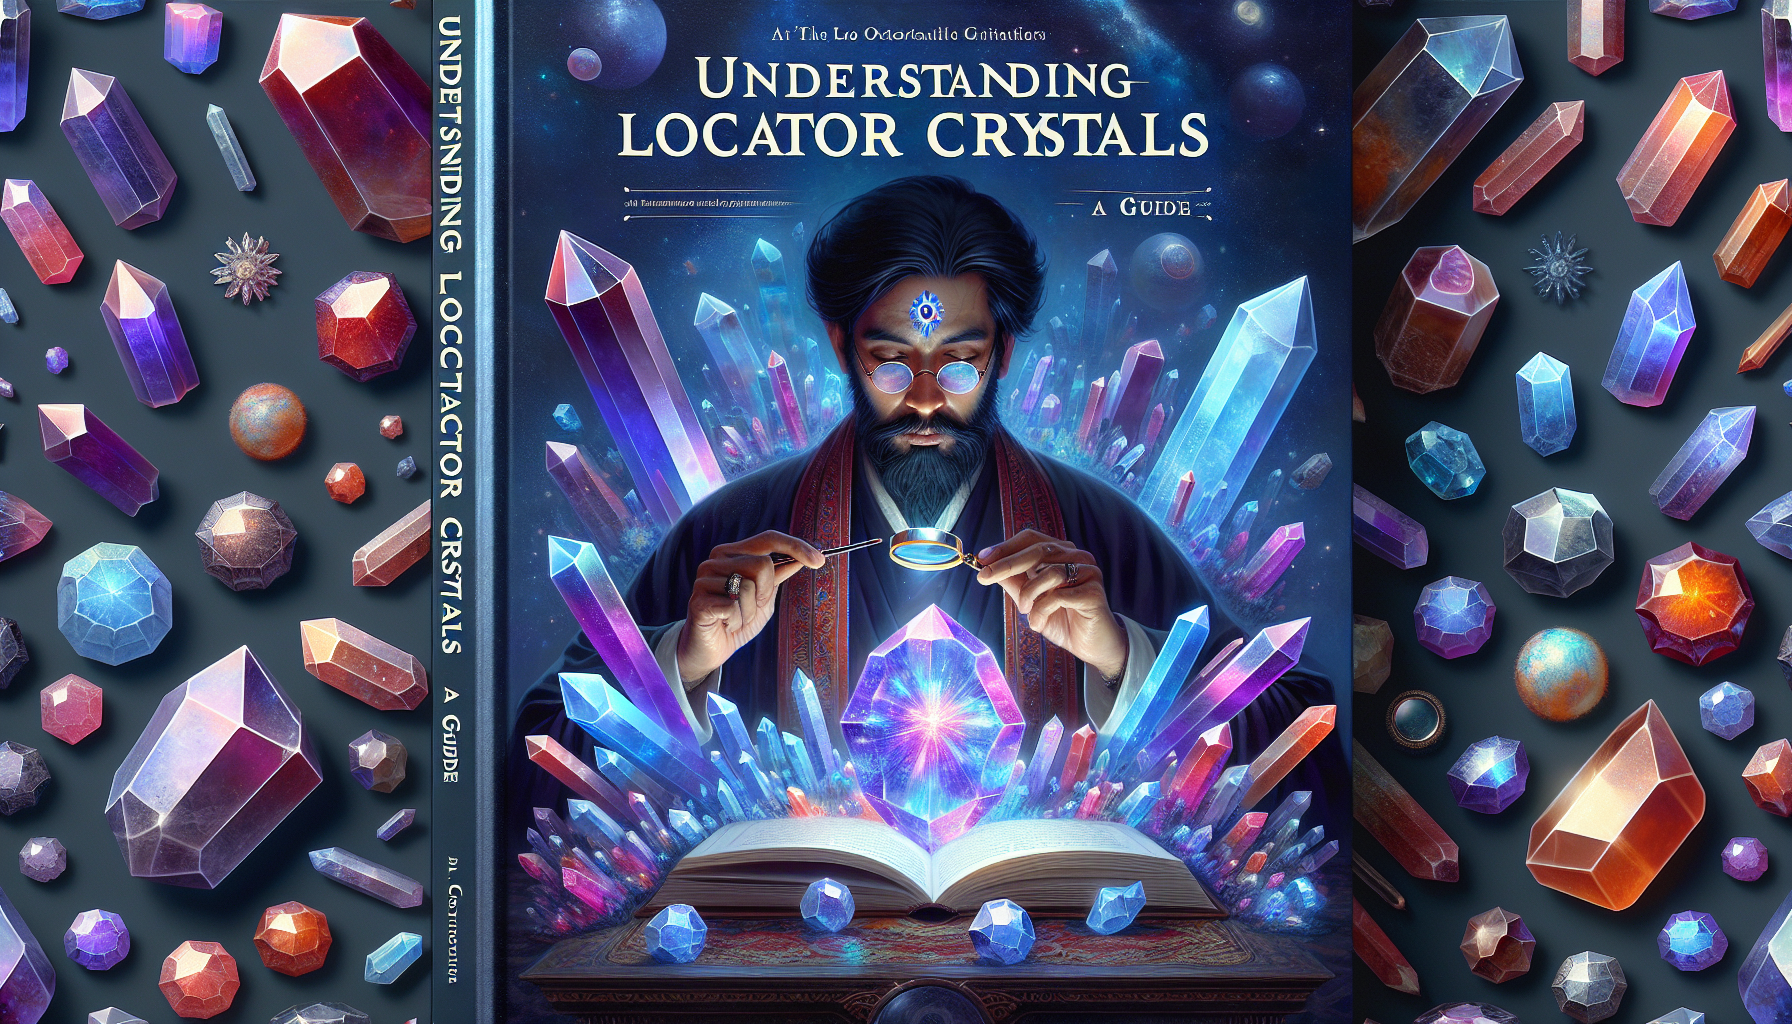 An informational guidebook cover titled 'Understanding Locator Crystals: A Guide'. The cover features an array of different locator crystals in various sizes and colors, arranged aesthetically. There'